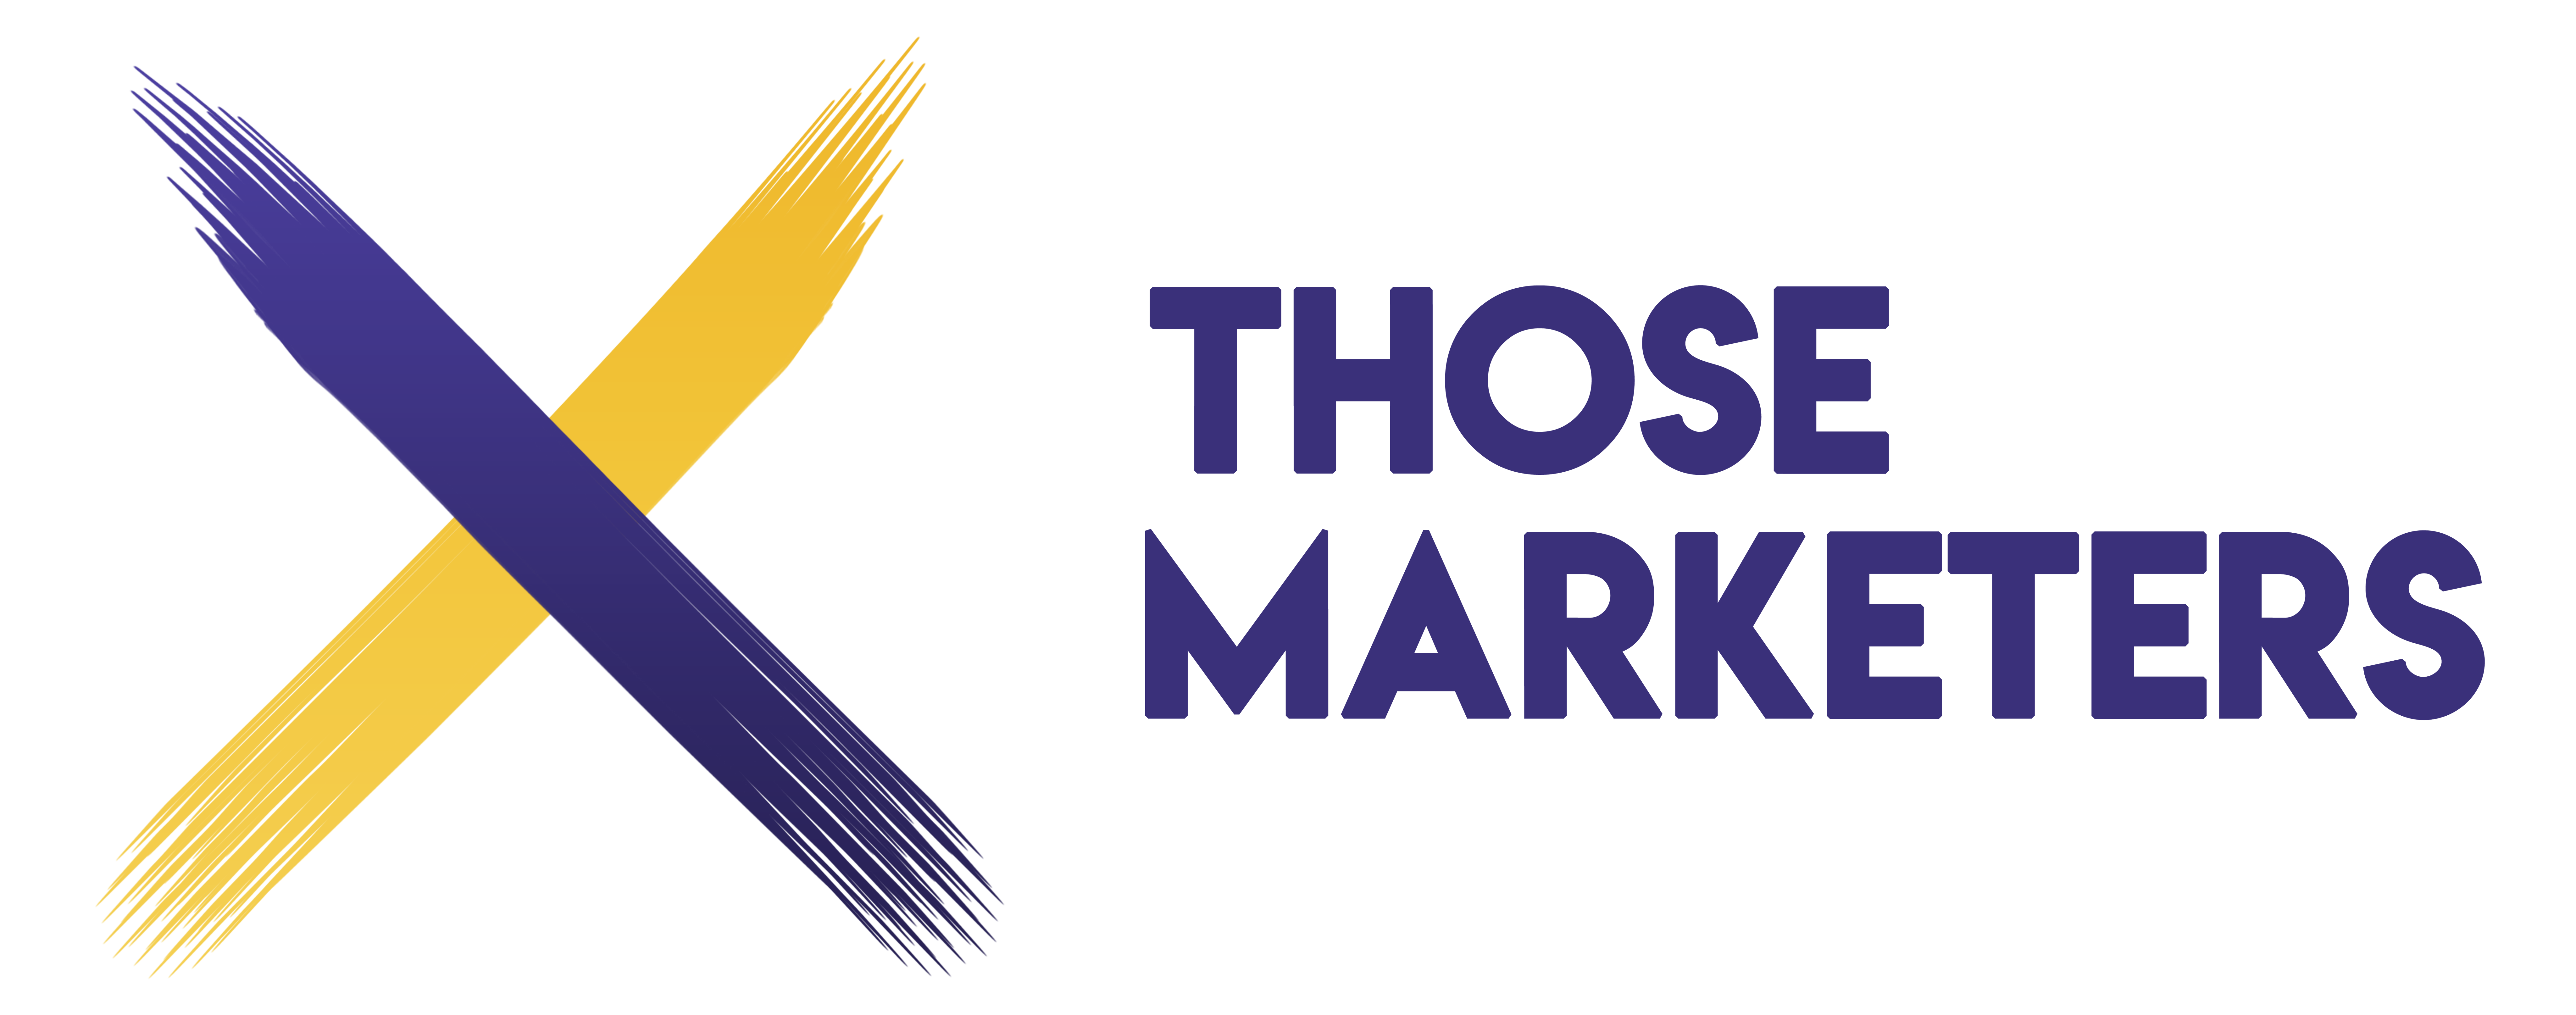 Those Marketers - #1 Marketing Agency in New York Tri State Area